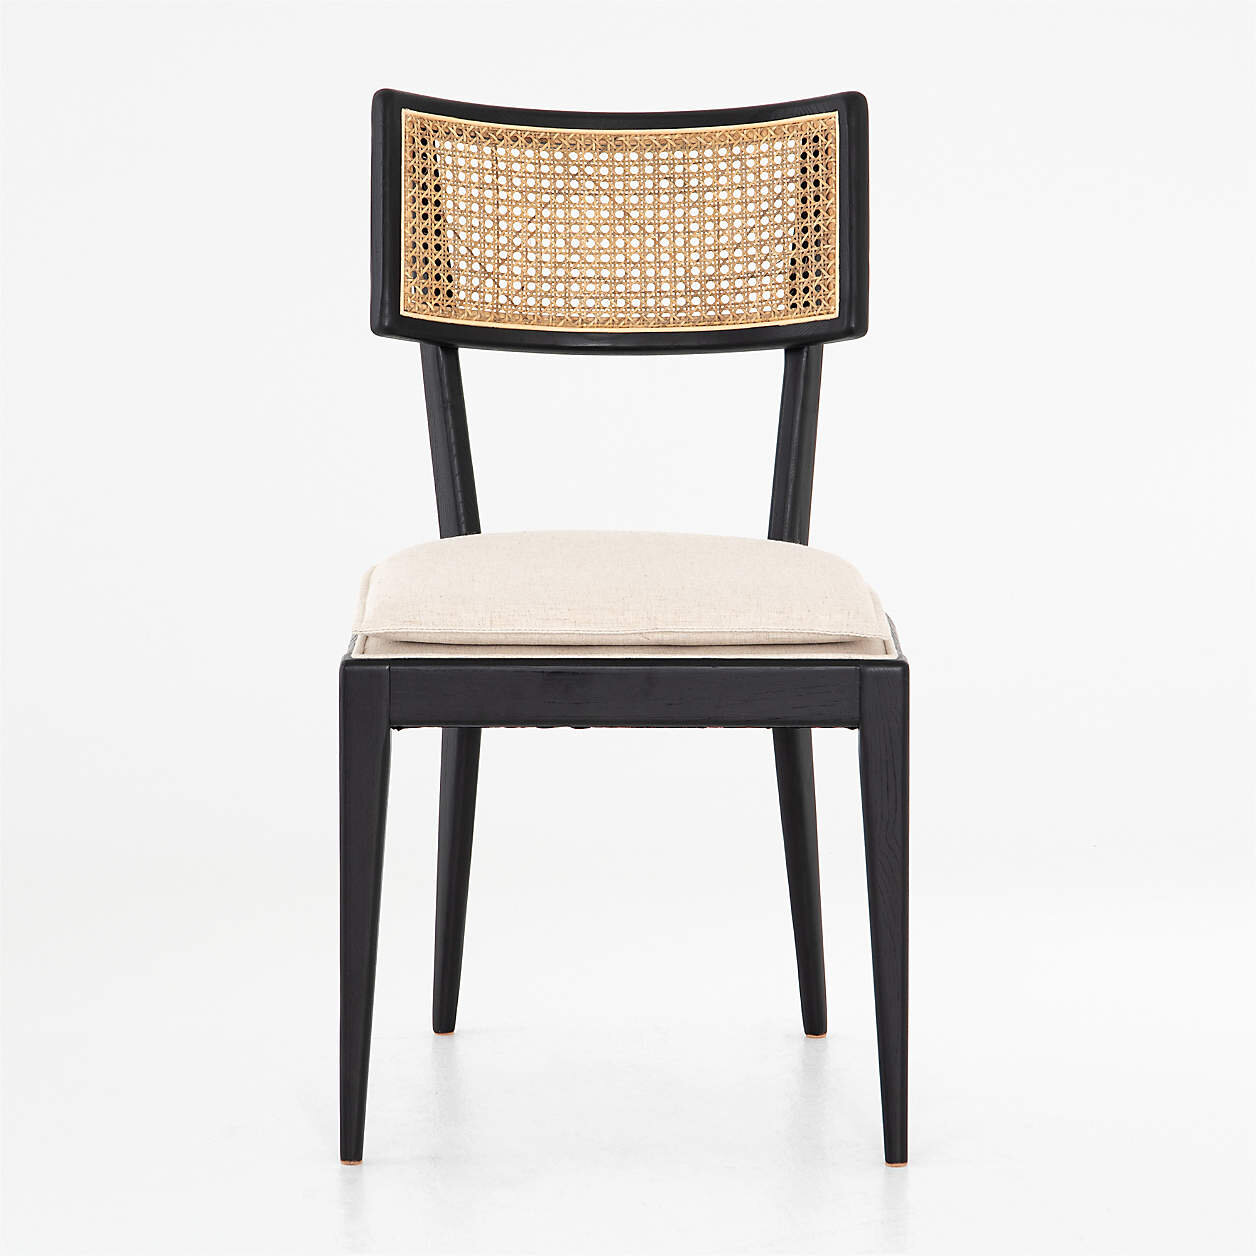 Crate &amp; Barrel - Libby Cane Dining Chair - $399